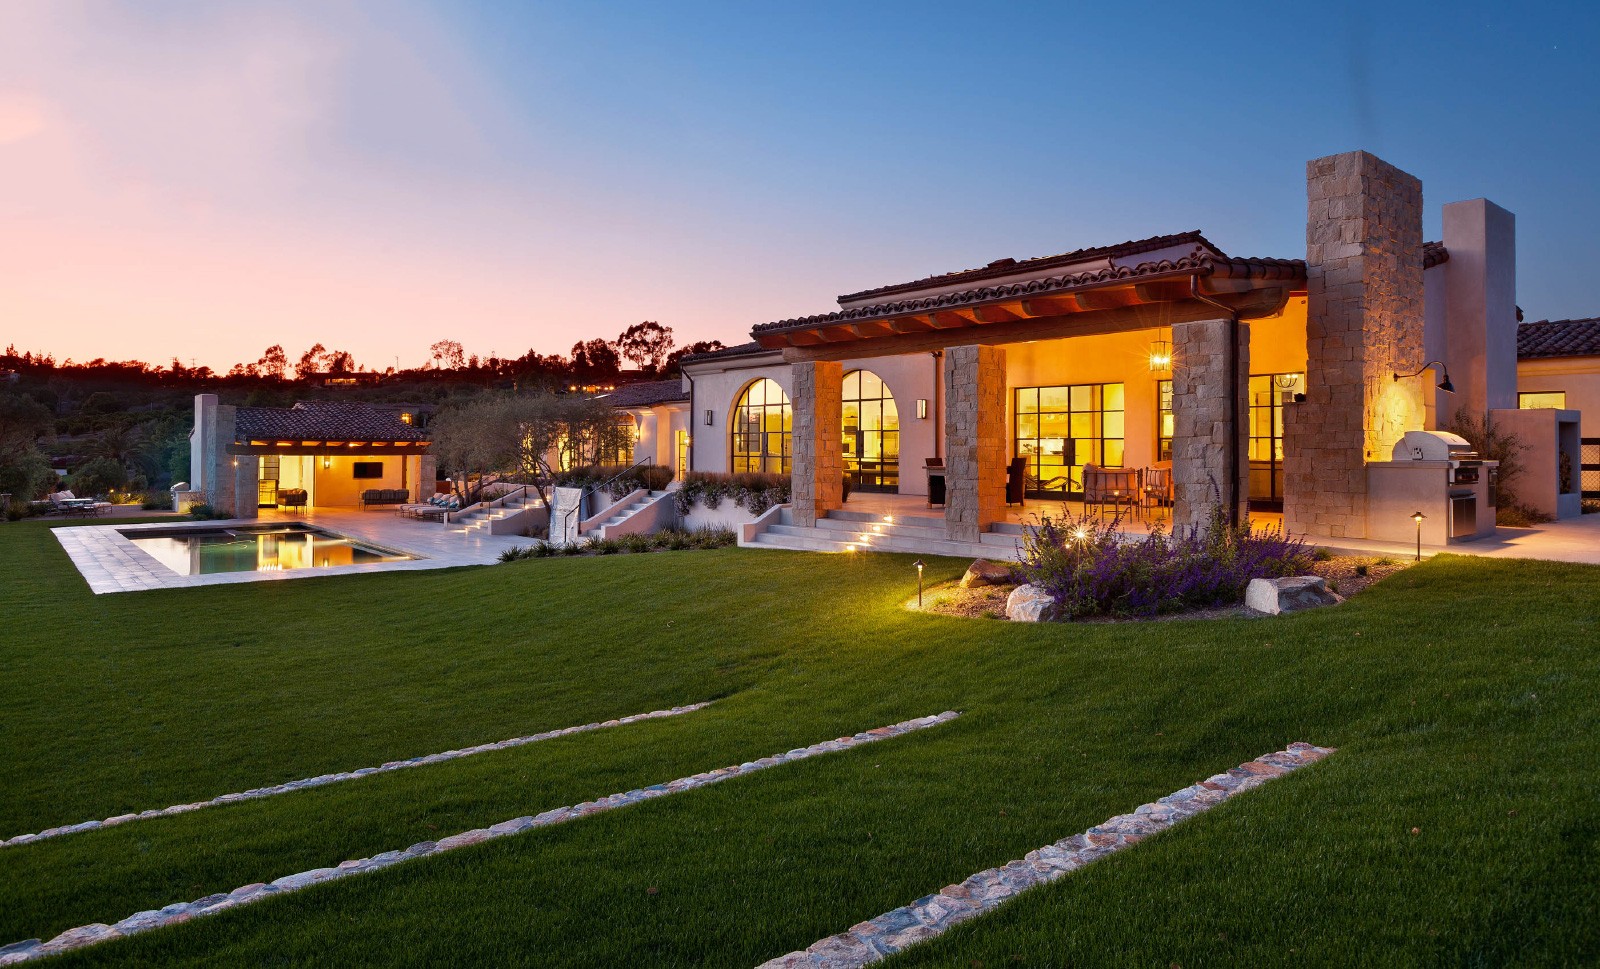 House at sunset featuring Portella windows and doors.